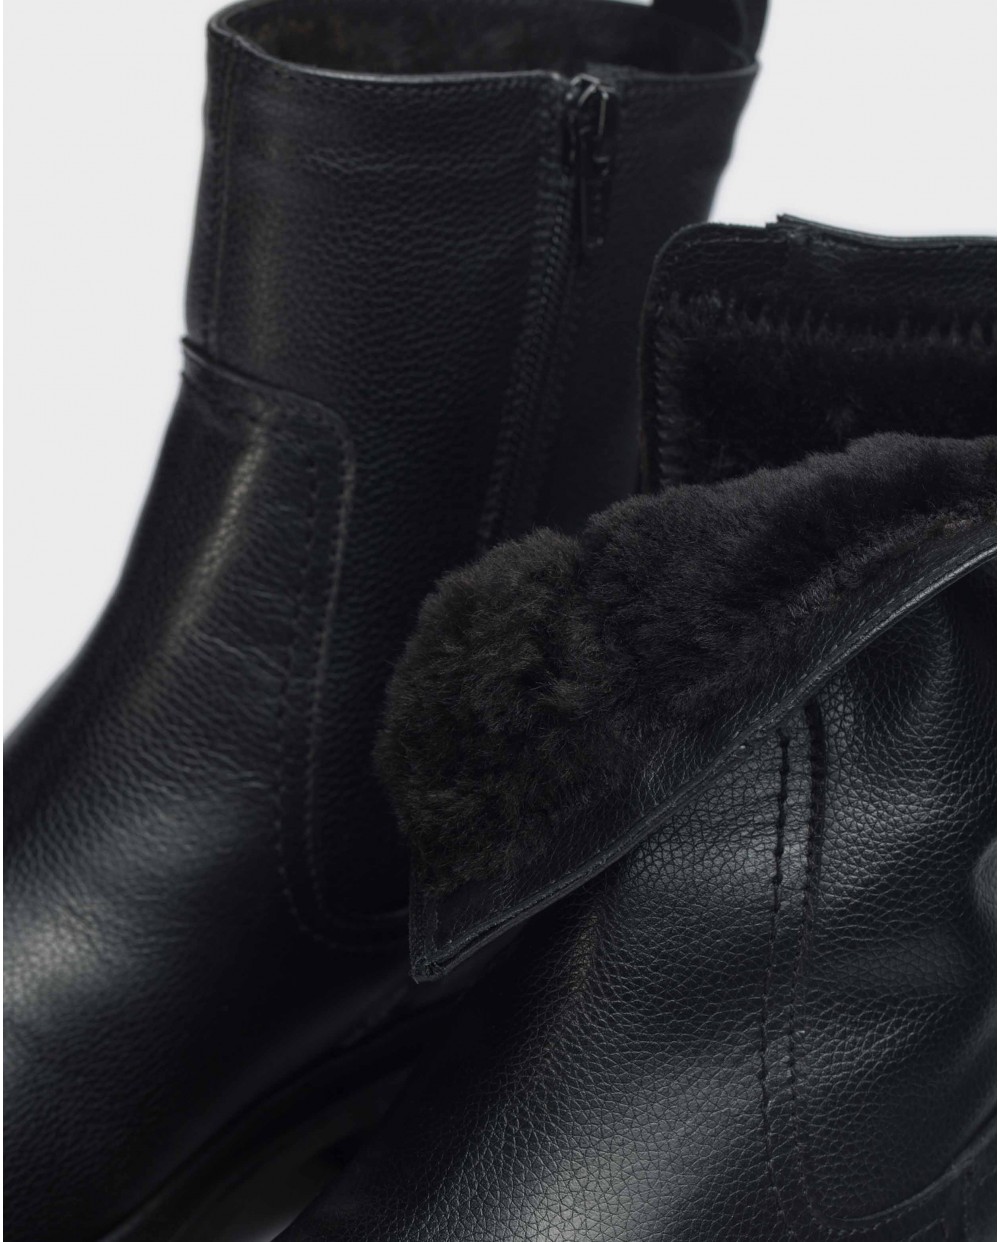 Wonders-Ankle Boots-Black Indios Ankle Boot